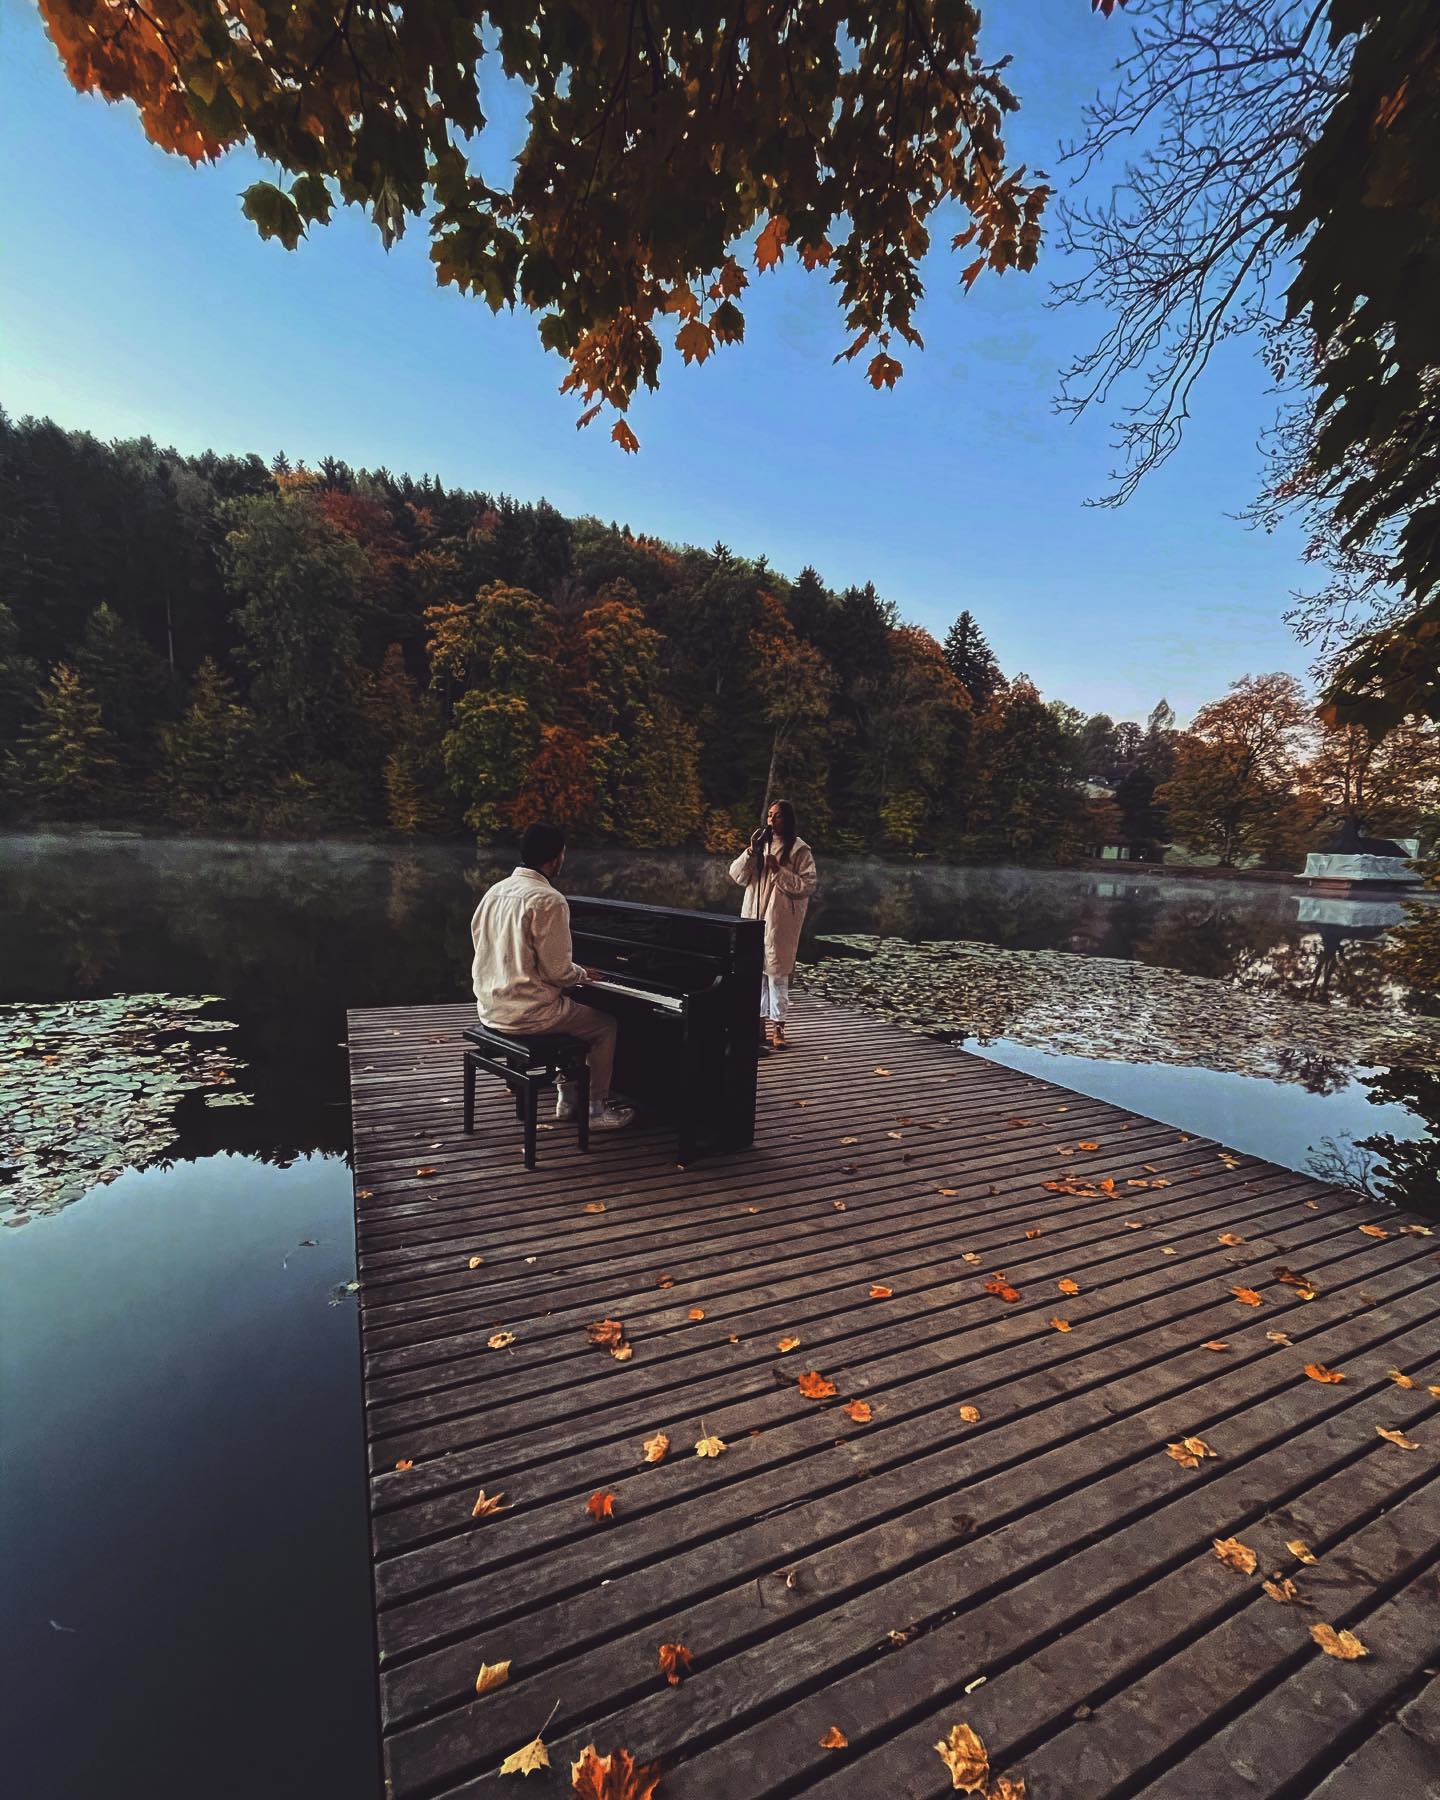 throwback to our piano sessions. did you like them?☺️🍁 
you can find them on all platforms, on youtube with video!🤍

#weareava#ava#piano#vocals#pianosessions#debutalbum#throwback#electropop#pop#innergardening#muve#musikvertrieb#band#trio#music#newcomer#switzerland#trio#stripped#acoustic#pianoversion#autumn#fall#conquerme#nomore#dreamscometrue#simple